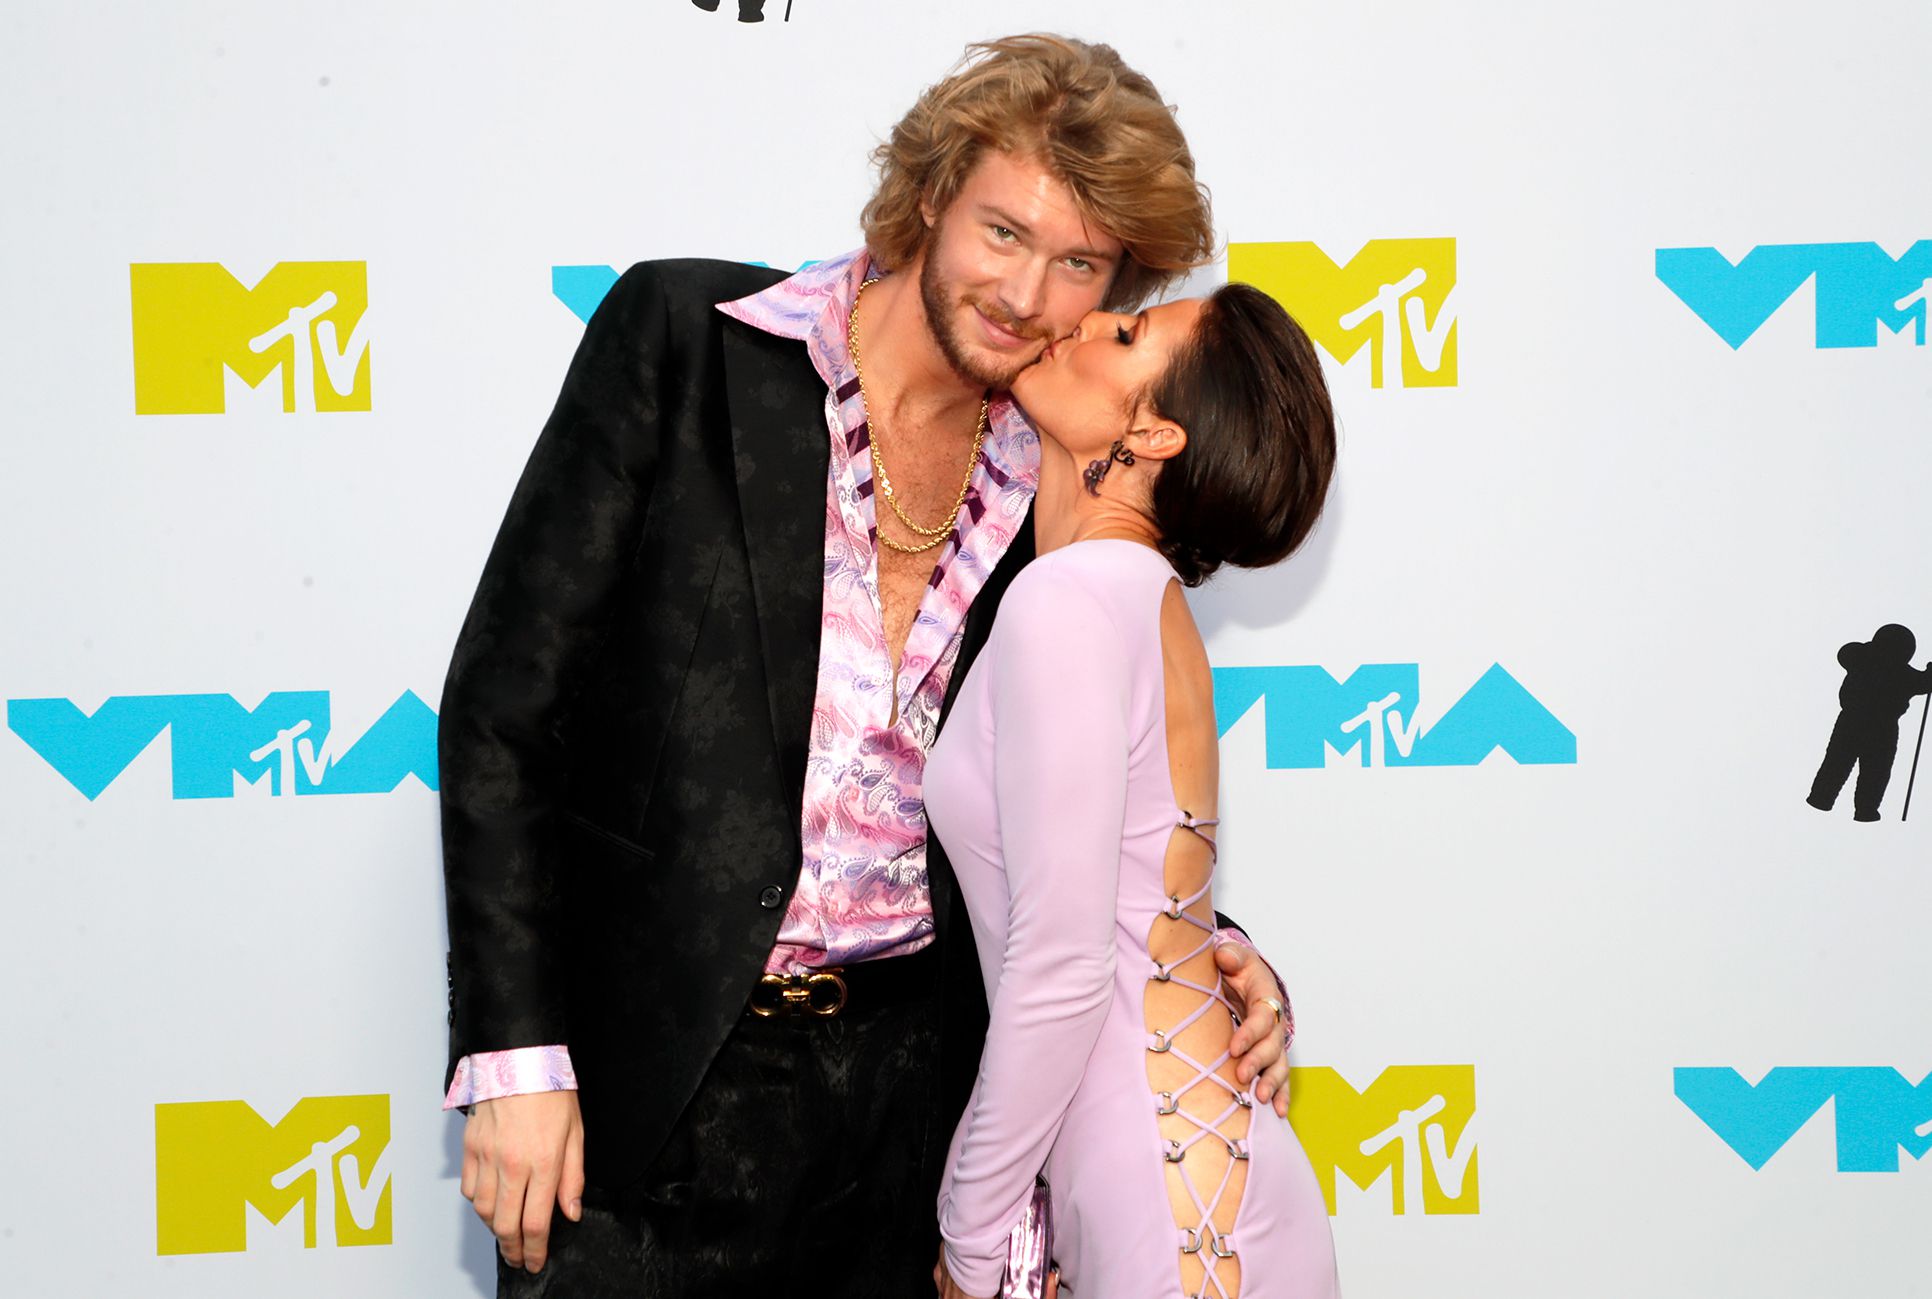 Addison Rae's mom, Sheri Easterling, and rapper Yung Gravy attend VMAs together. 